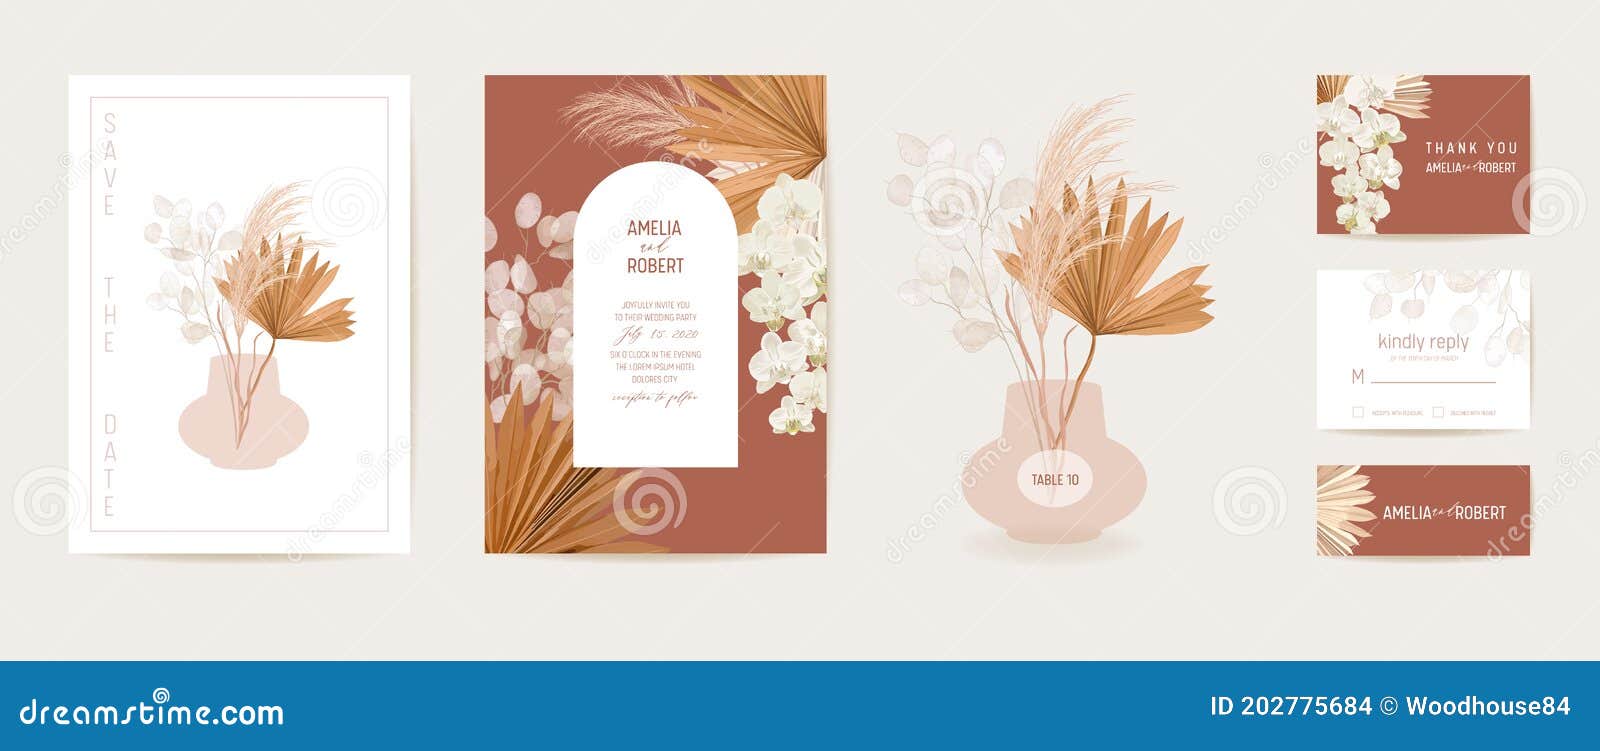 watercolor wedding dried lunaria, orchid, pampas grass floral invitation.  exotic dry flowers, palm leaves